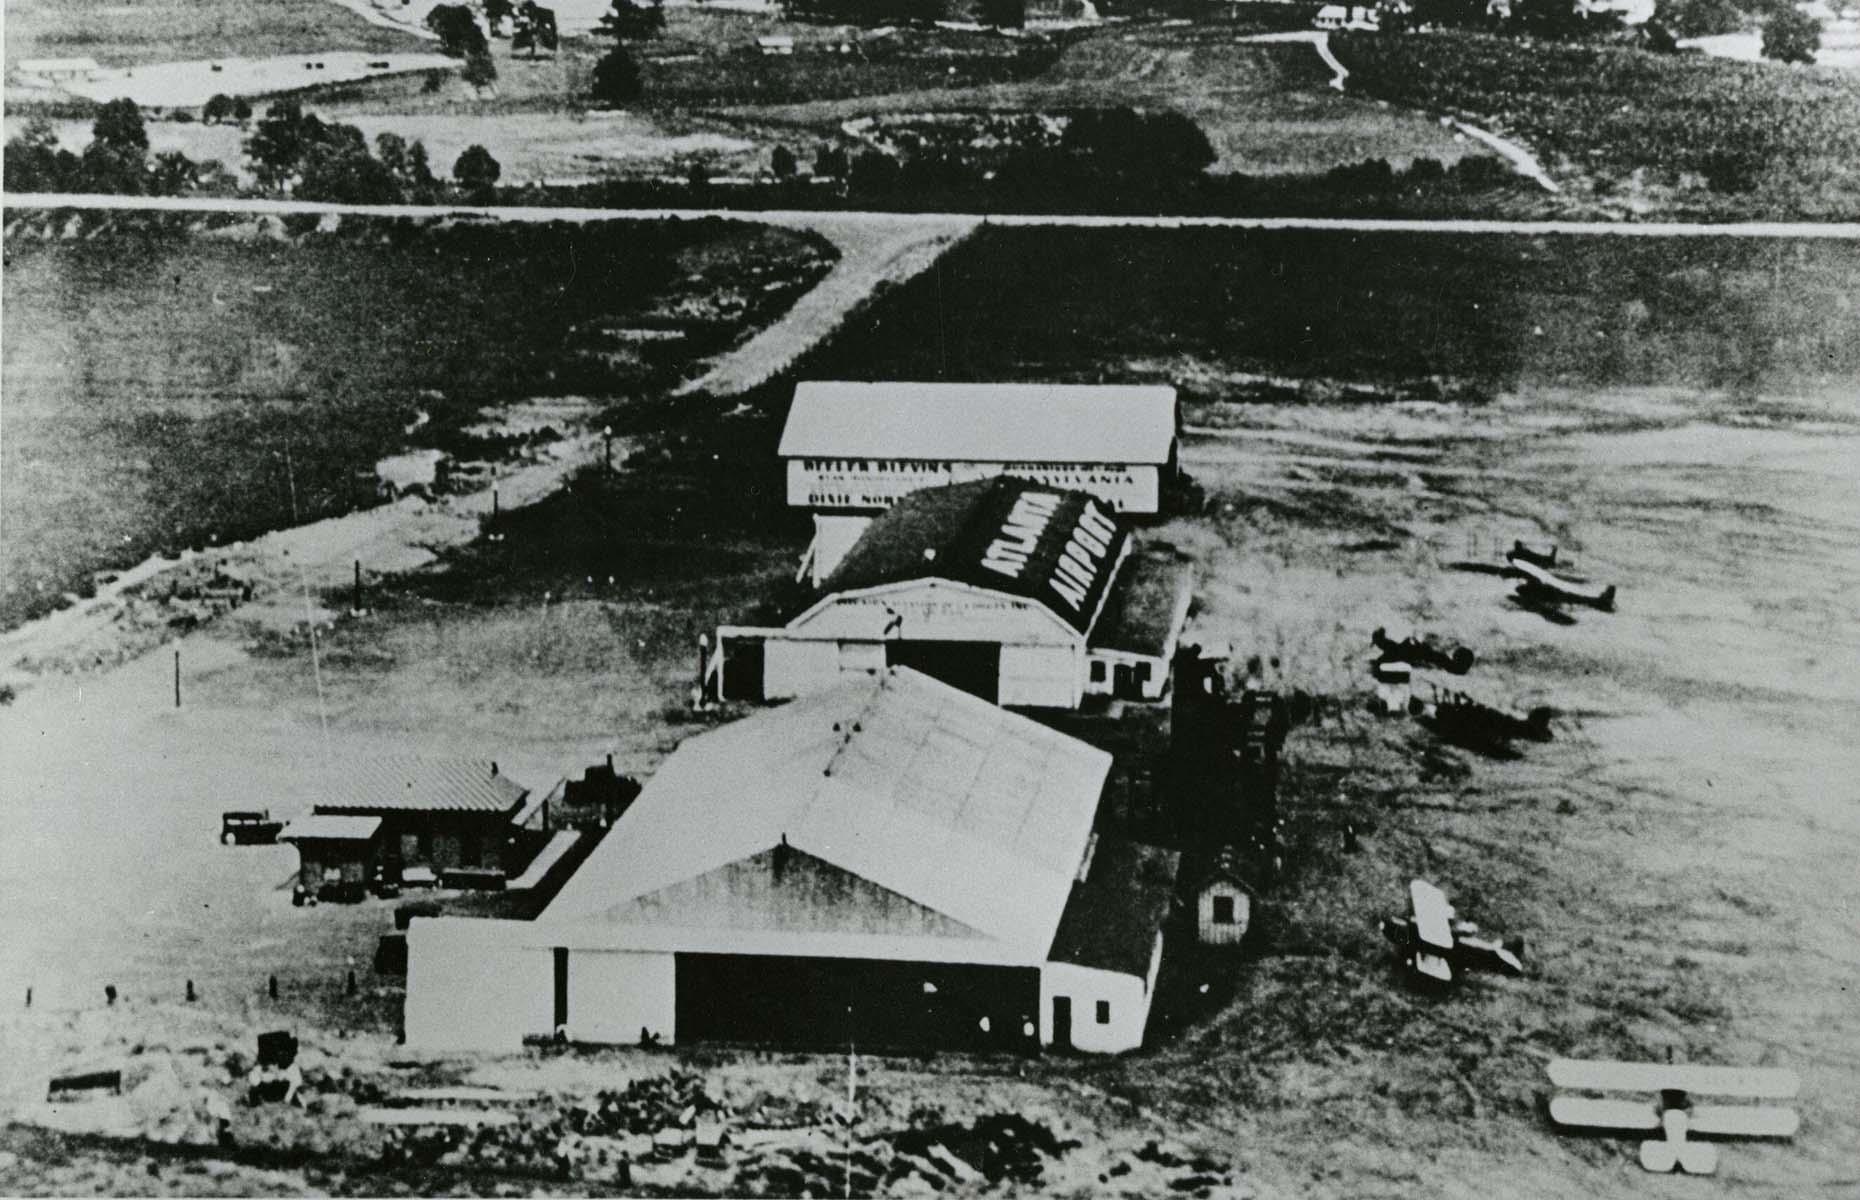 <p>Before Atlanta's main airport began taking shape in the 1920s, its site was occupied by an abandoned racetrack. Initially named Candler Field after the site's former owner, the airport saw its first commercial flight in 1926 and welcomed famed aviator Charles Lindbergh a year later. The airport would double in size during the Second World War and had become the busiest airport in the US by 1957 – and the busiest in the world between midday and 2pm each day. This 1927 image captures the airport in its earliest stages.</p>  <p><span><strong>Liking this? Click on the Follow button above for more great stories from loveEXPLORING</strong></span></p>